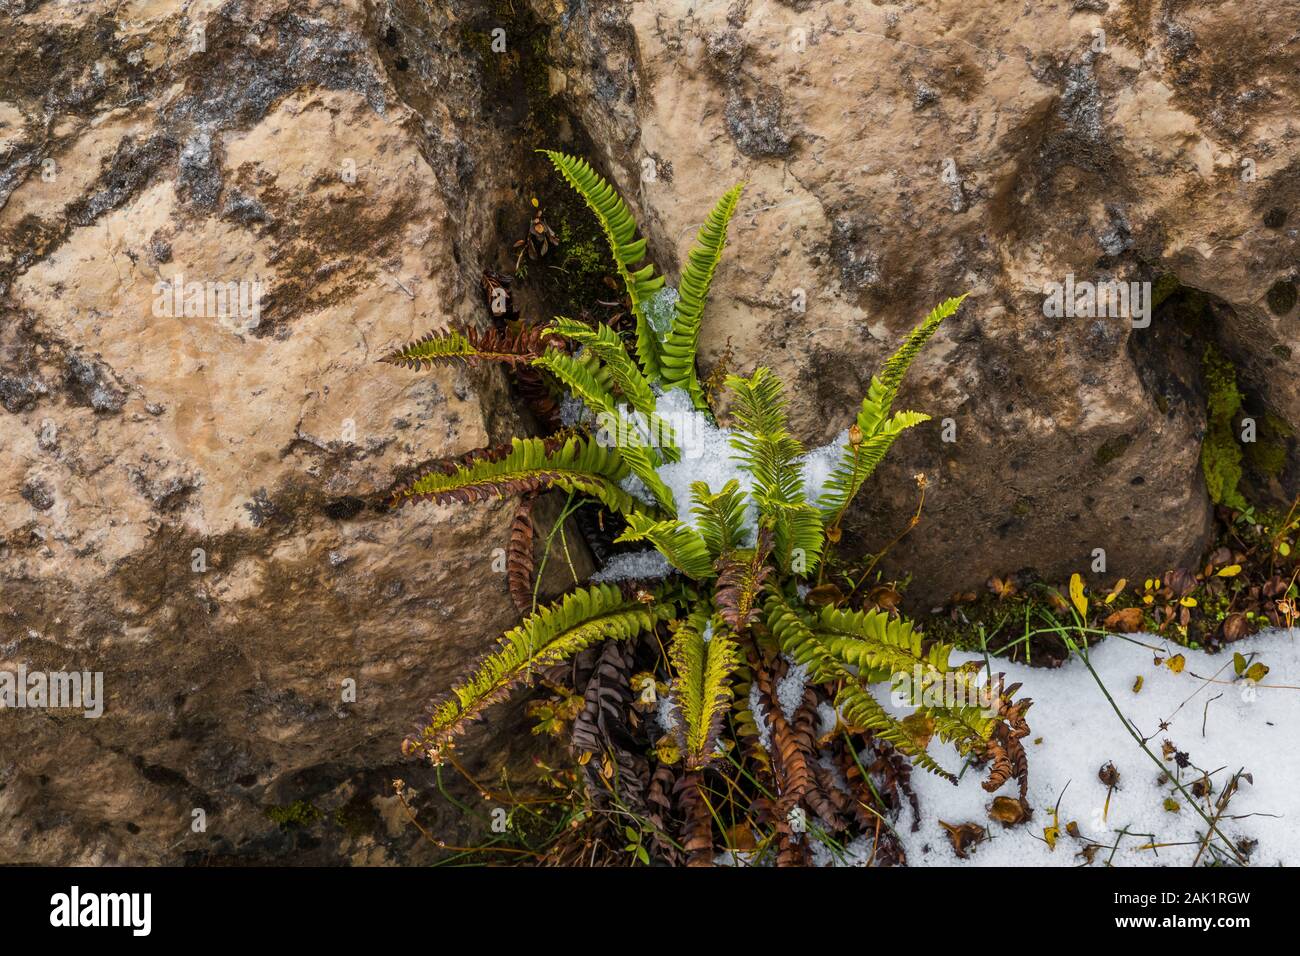 Northern Holly Fern, Polystichum lonchitis, growing in rocks near Lake McArthur in September in Yoho National Park, British Columbia, Canada Stock Photo